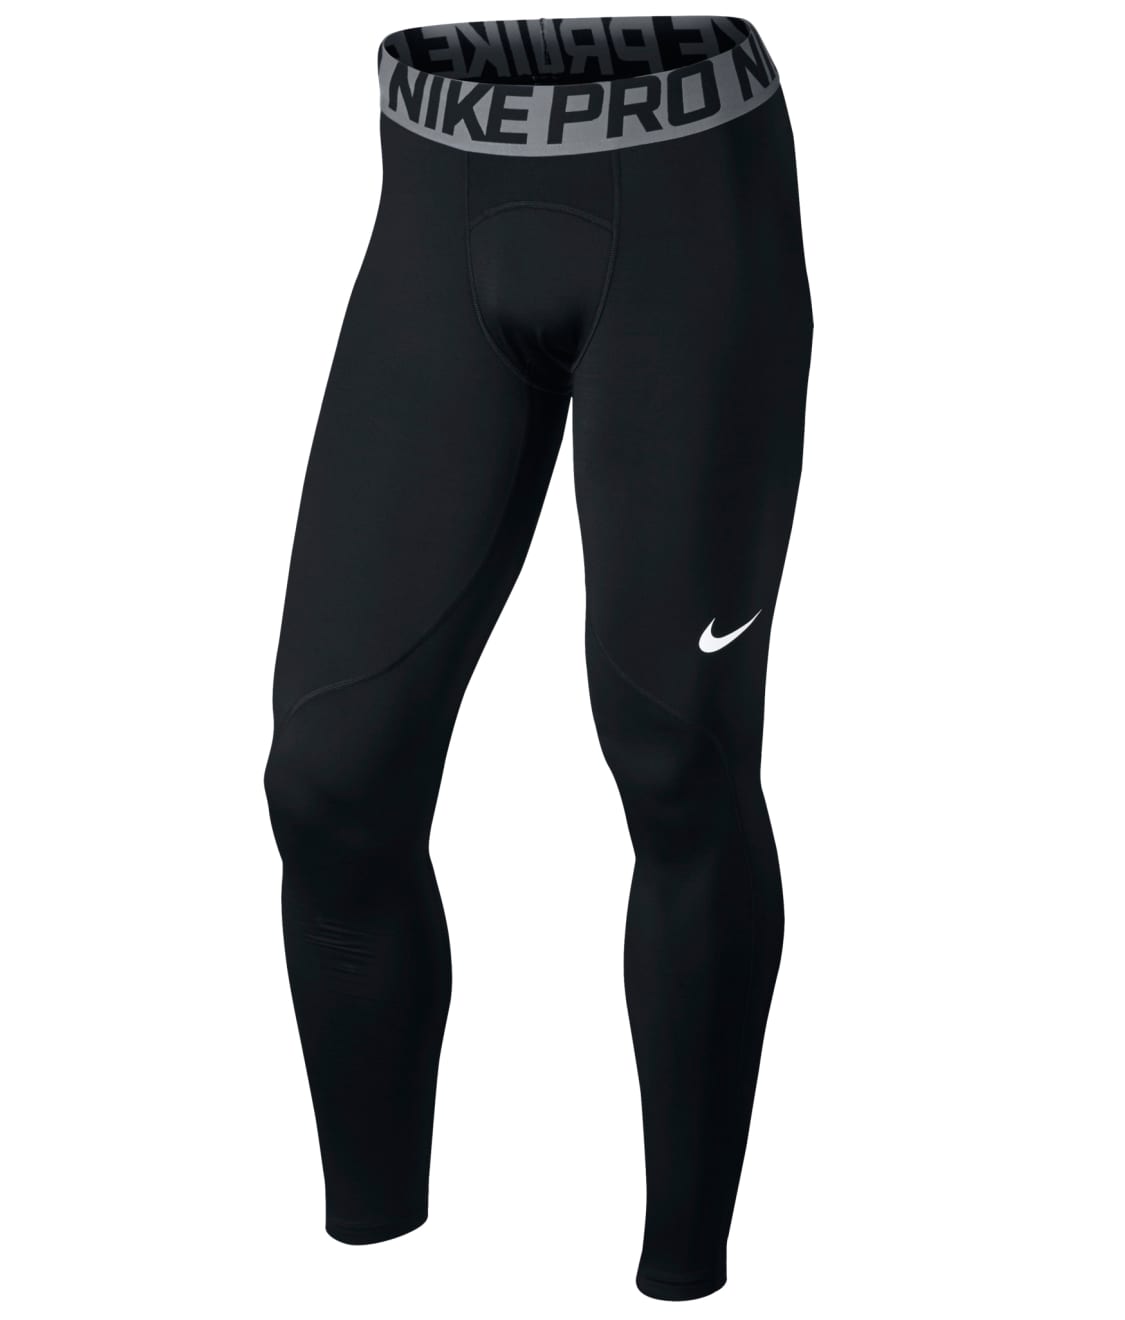 Nike Pro Training Tights & Reviews | Necessities (Style 838038)